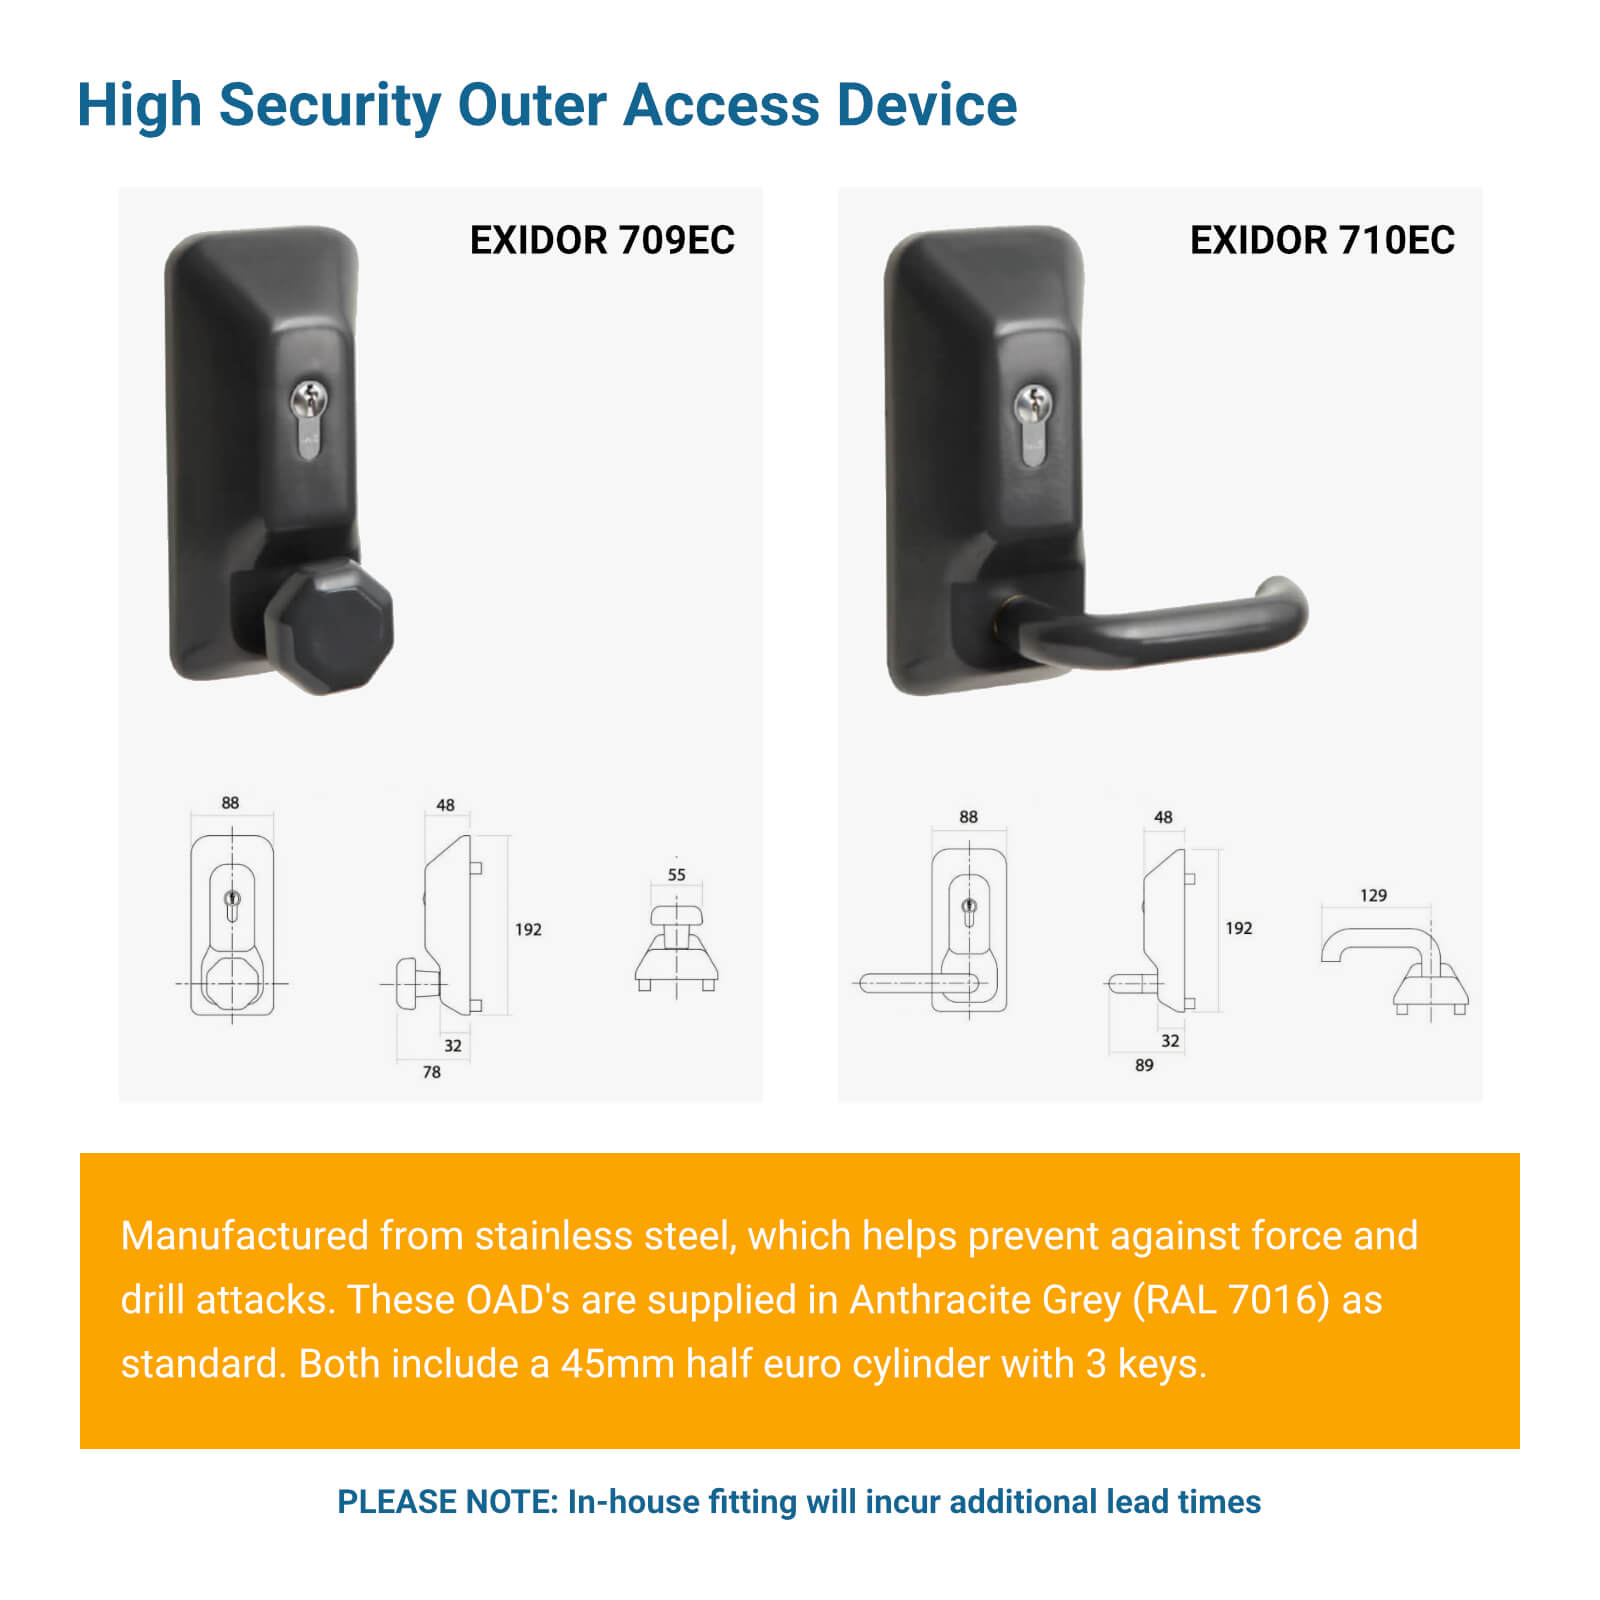 High Security Outer Access Device